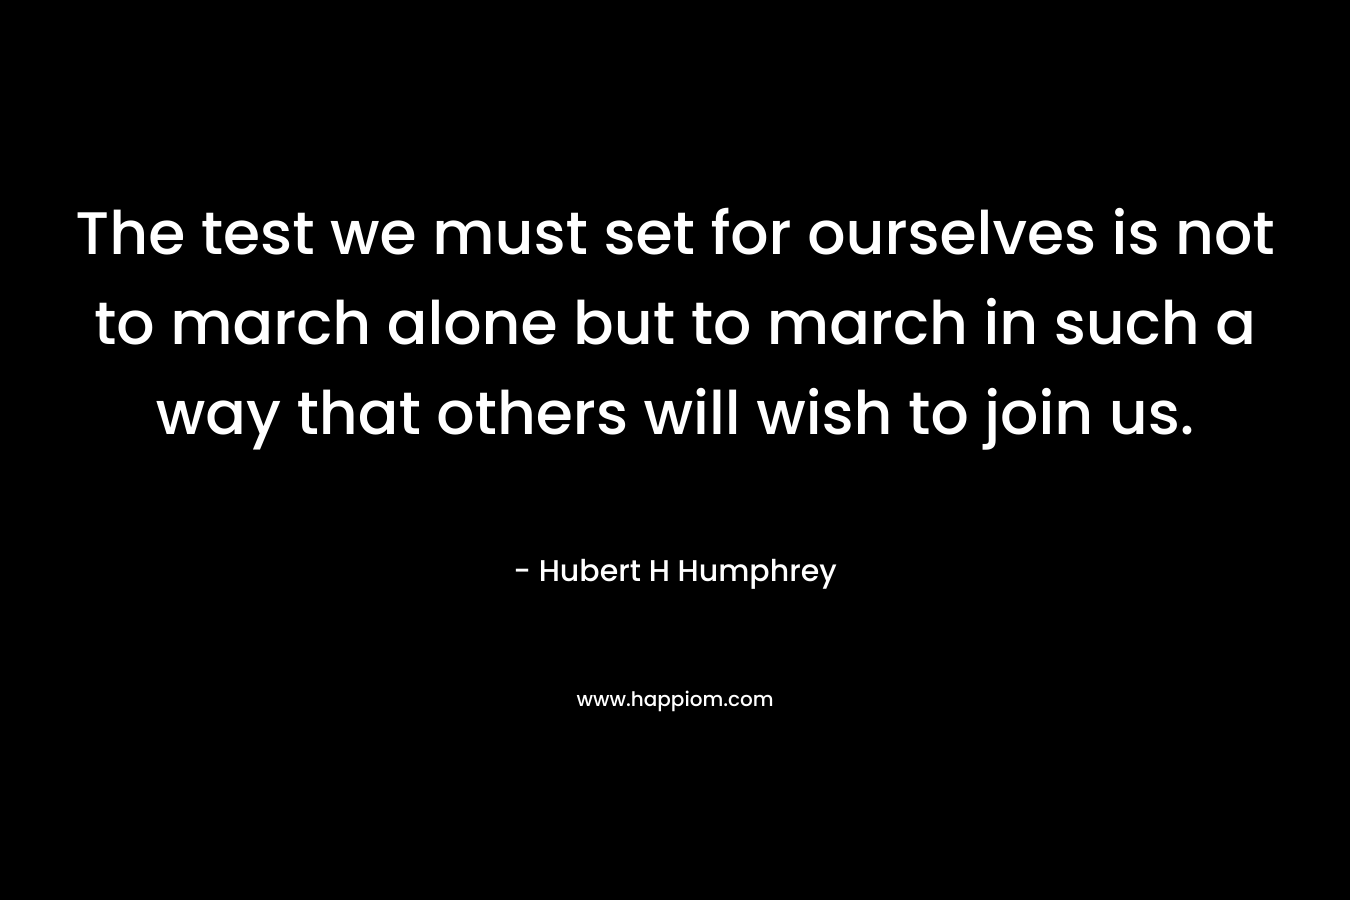 The test we must set for ourselves is not to march alone but to march in such a way that others will wish to join us.